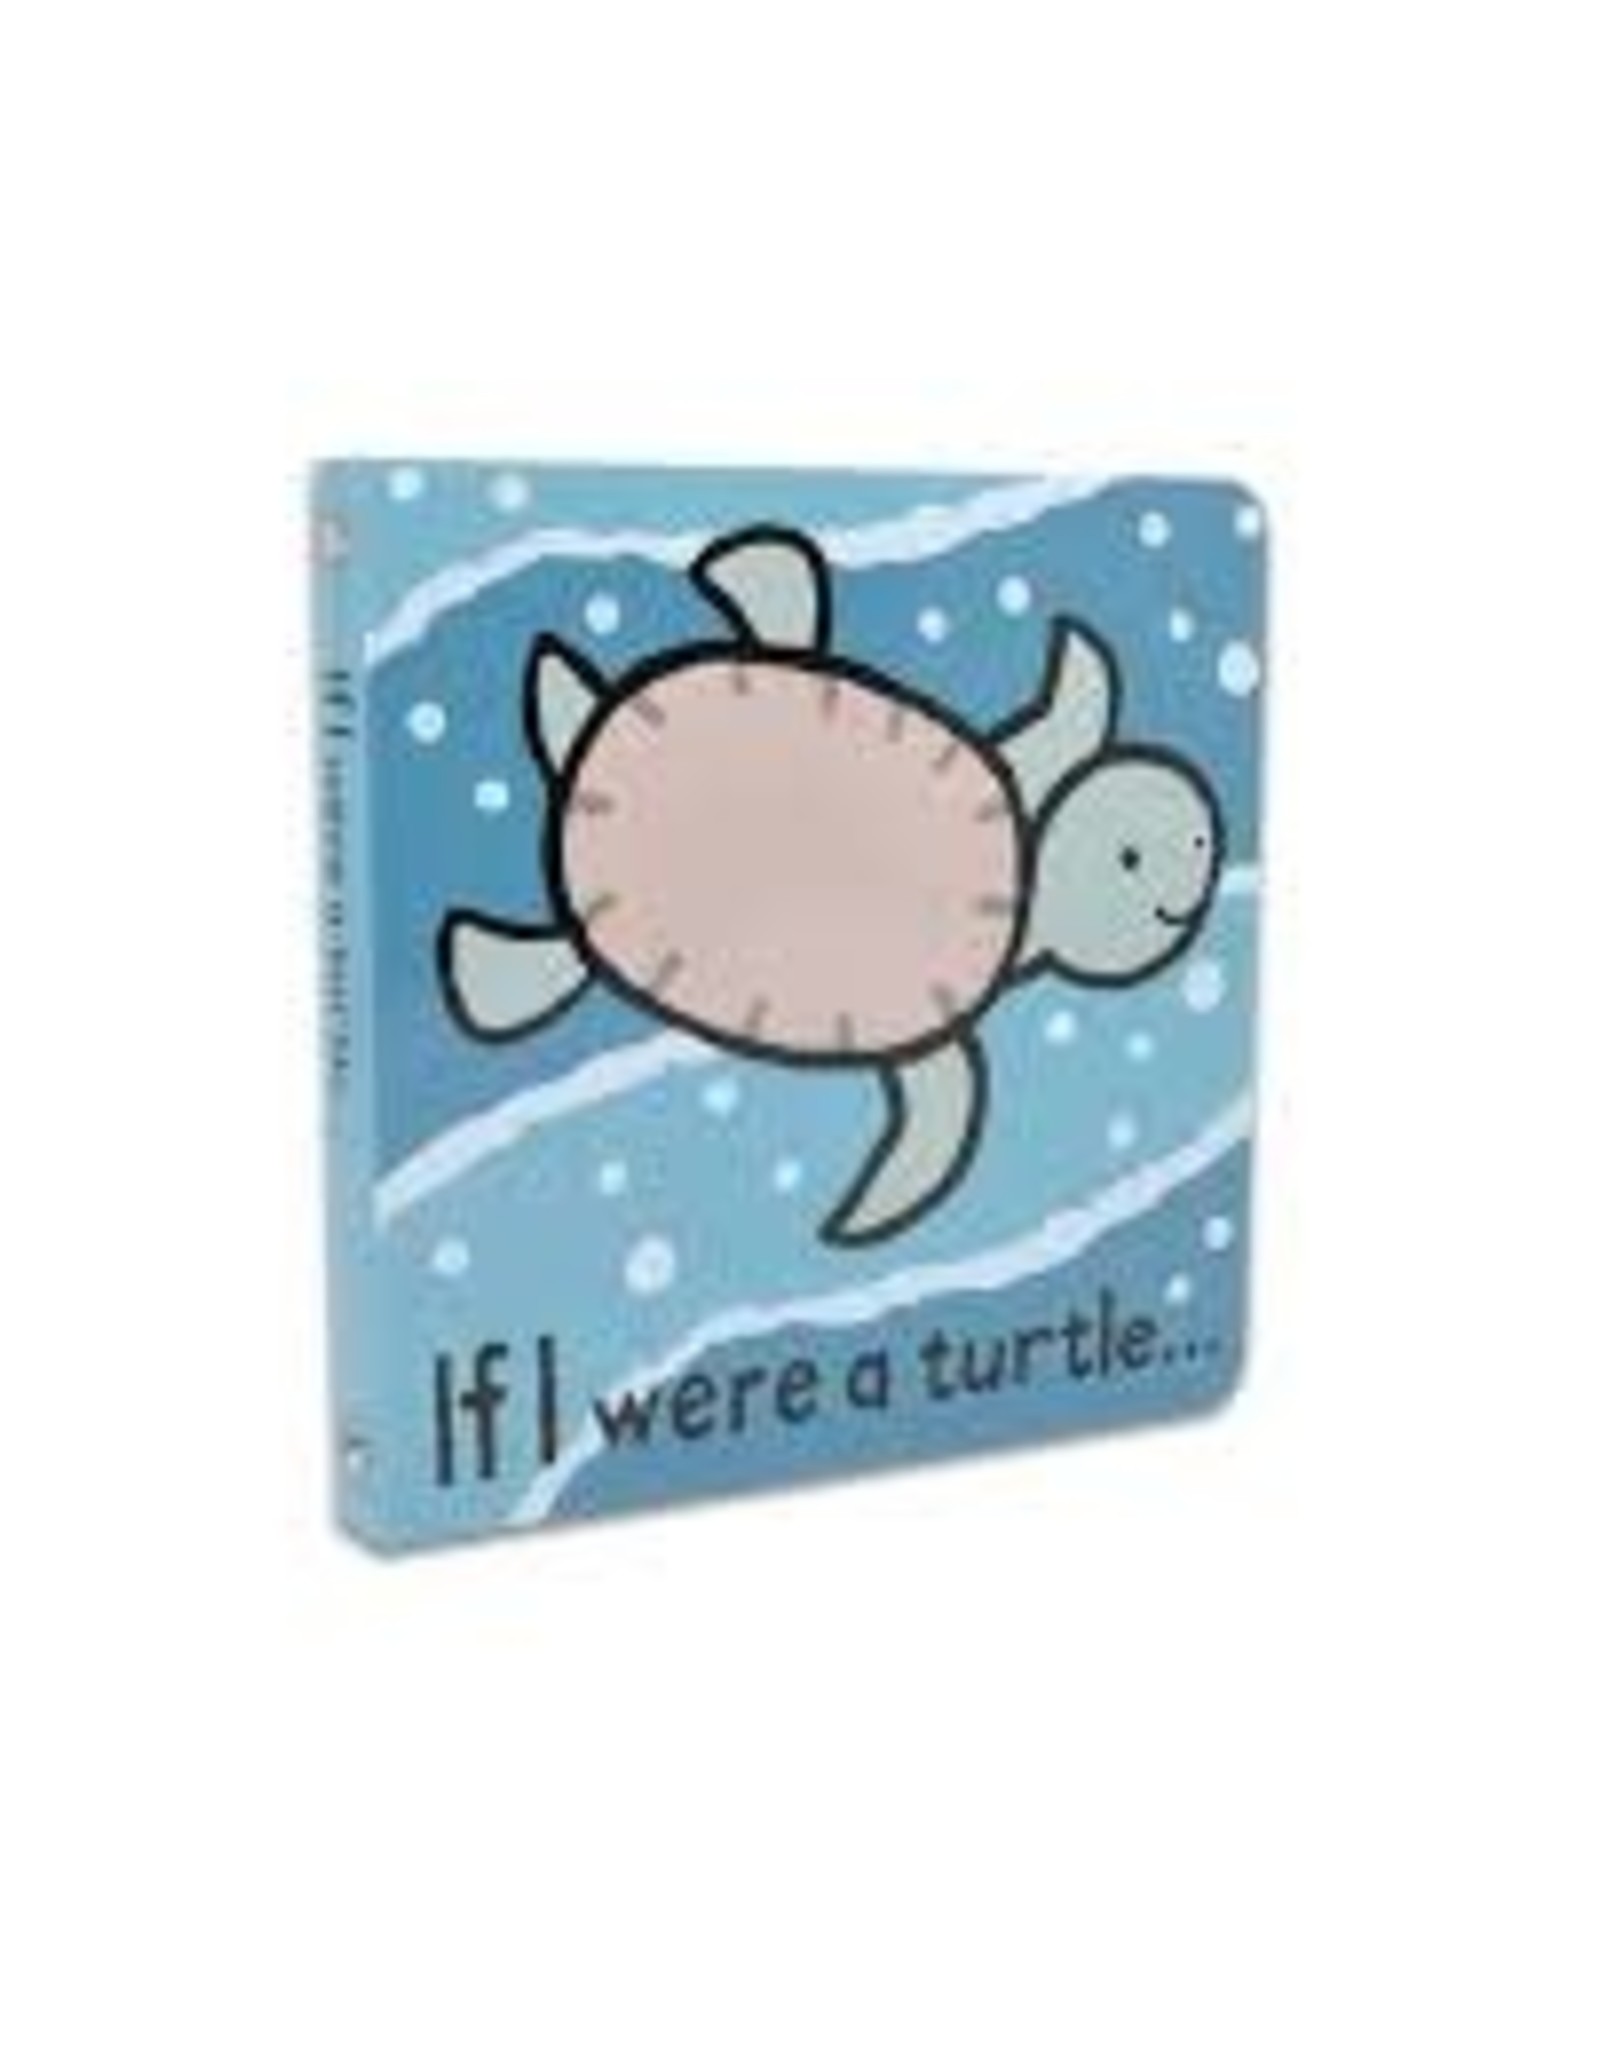 JELLYCAT IF I WERE A TURTLE